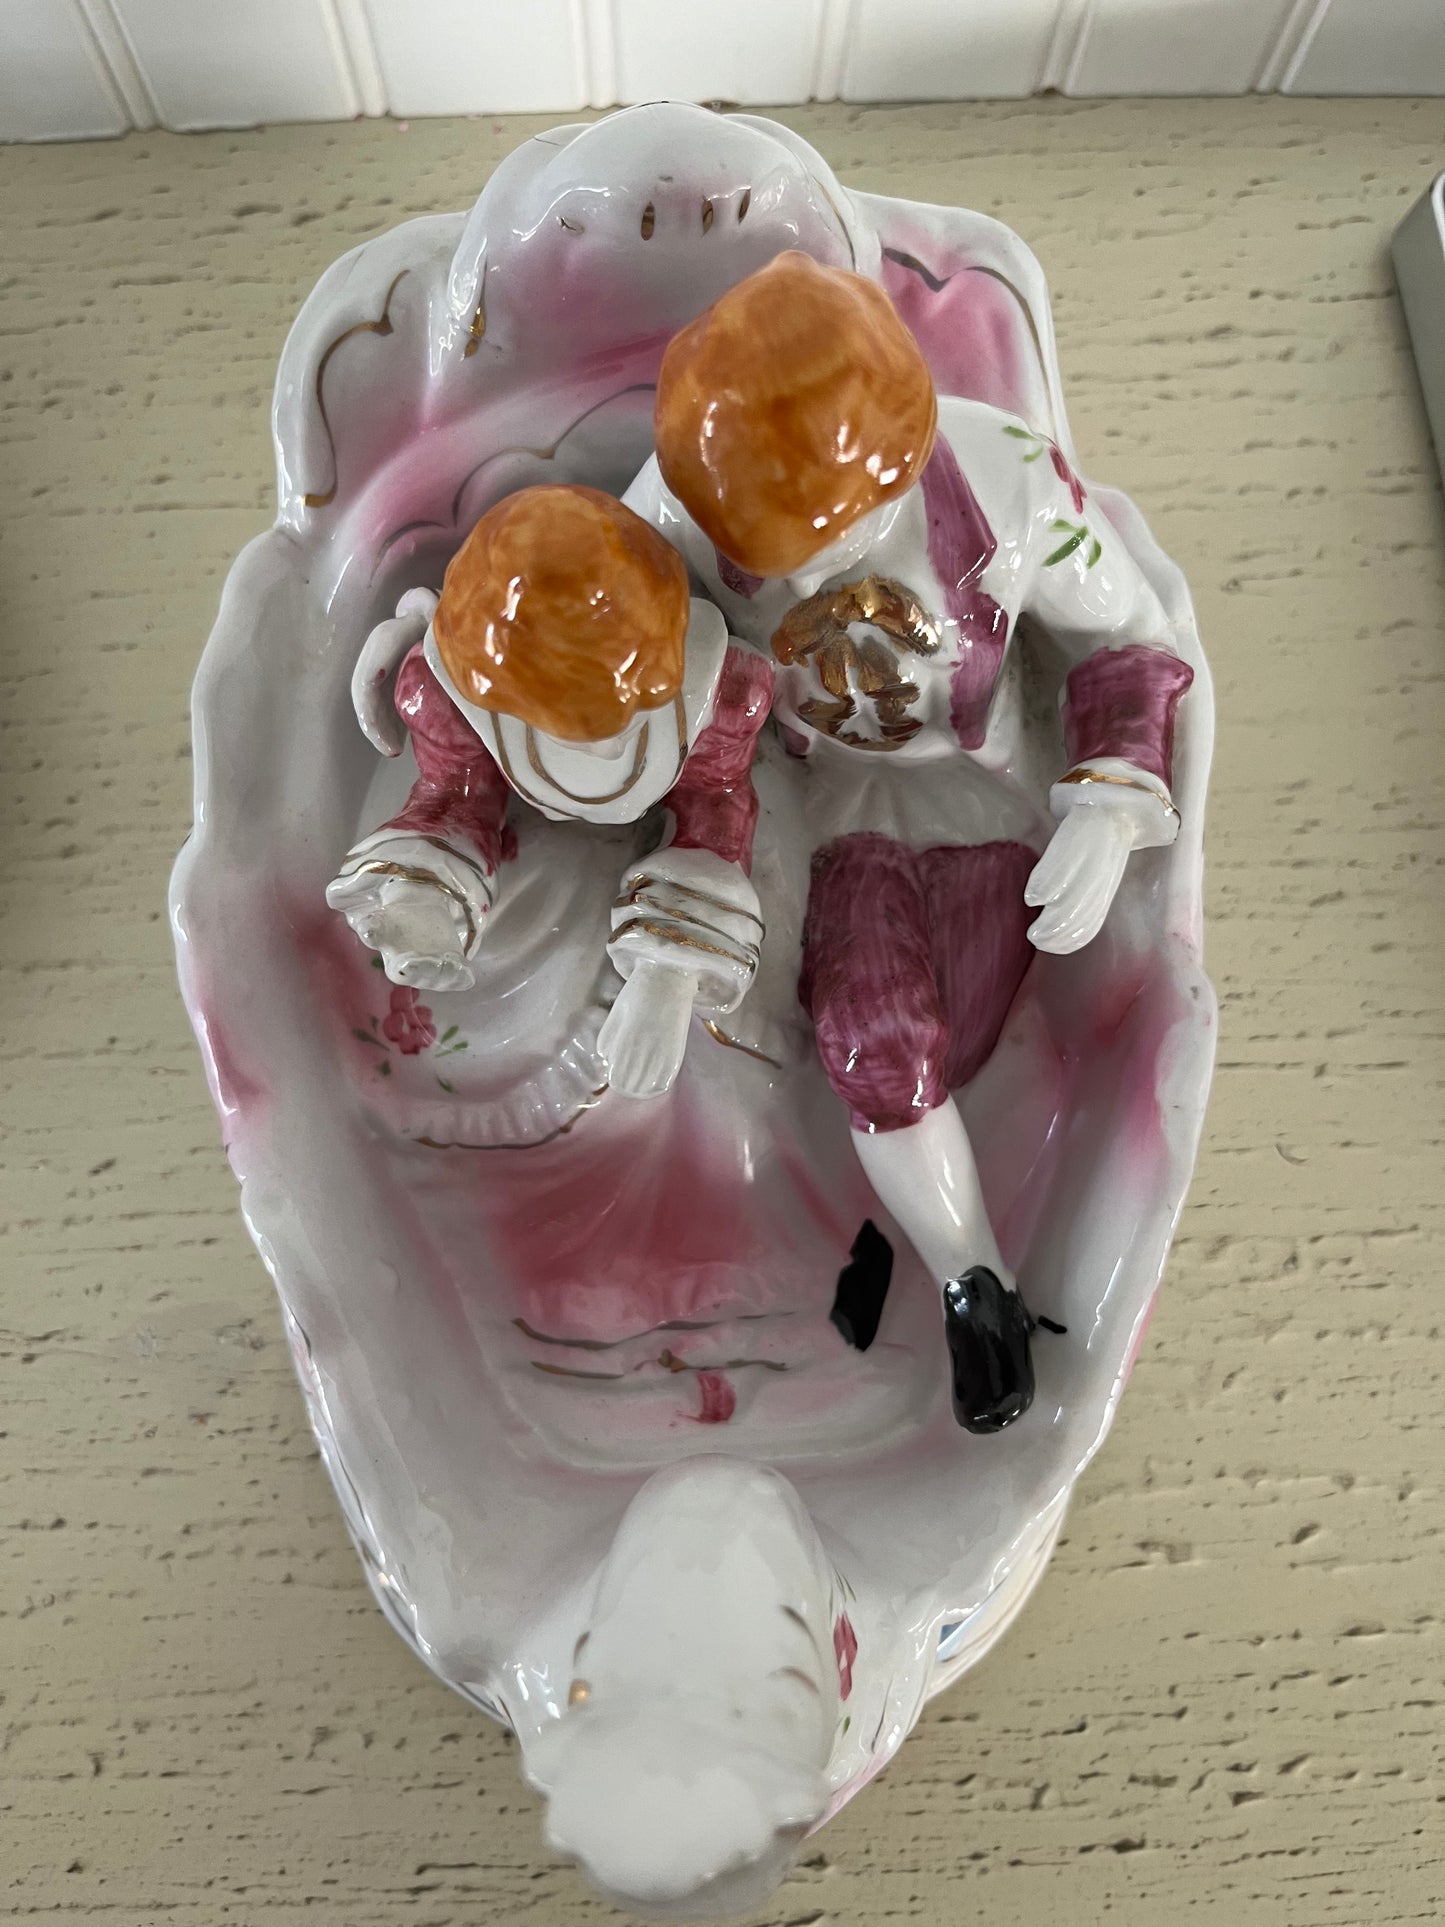 Mid Century Vintage Mirtex Porcelain Swan Boat with Victorian Couple - Pink, Blue, and Opulent White with Gold Accents